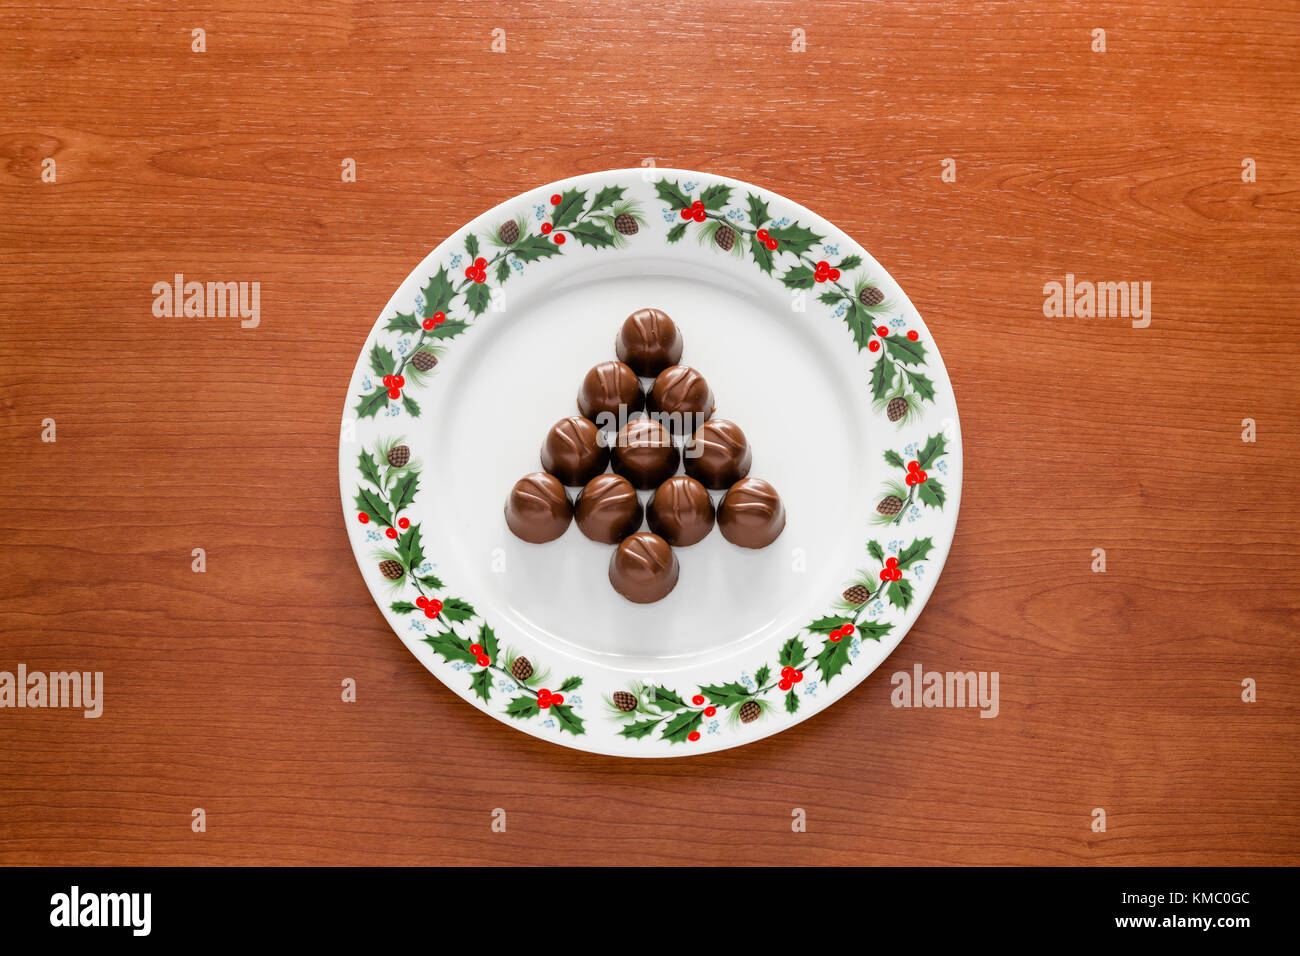 Close up of a plate with christmas decorations and with chocolate cookies in tree shape. Stock Photo